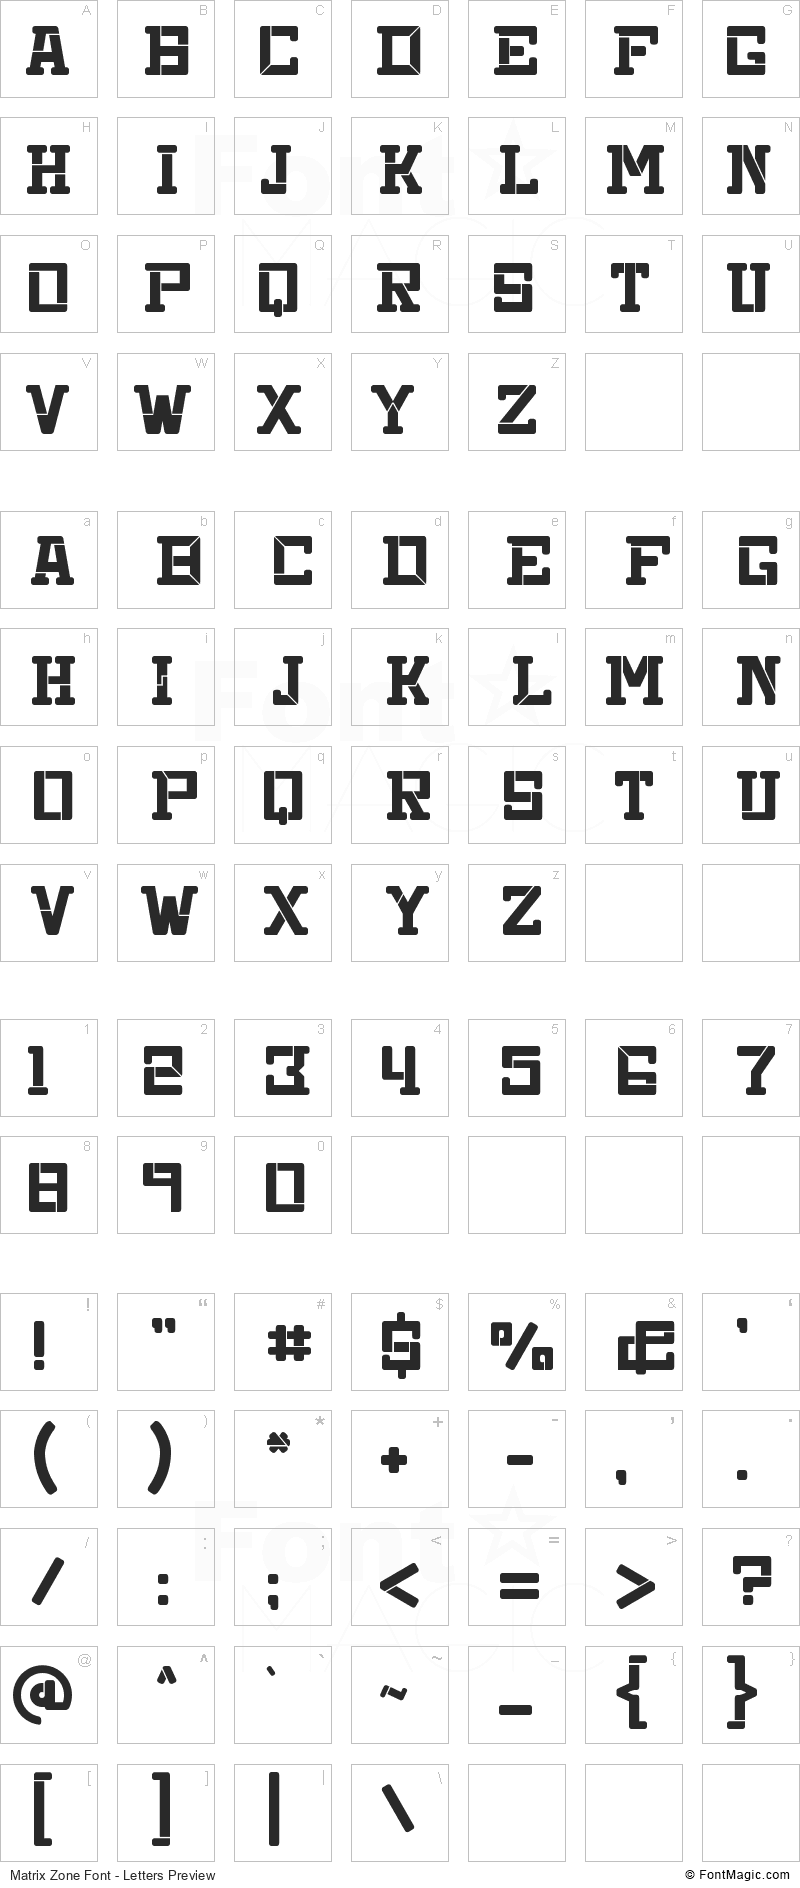 Matrix Zone Font - All Latters Preview Chart